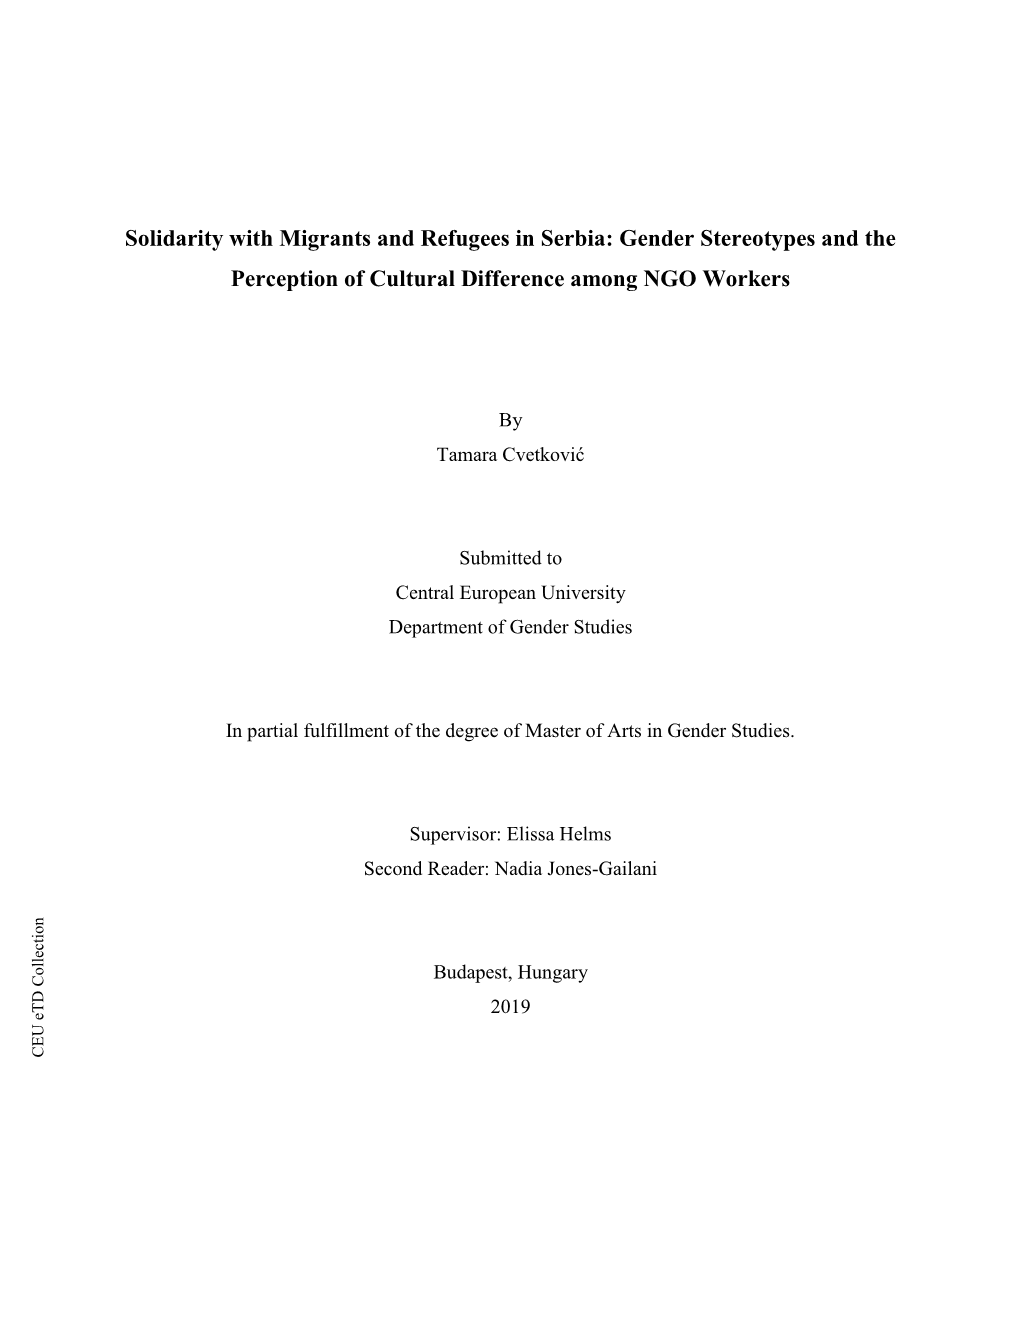 Solidarity with Migrants and Refugees in Serbia: Gender Stereotypes and the Perception of Cultural Difference Among NGO Workers